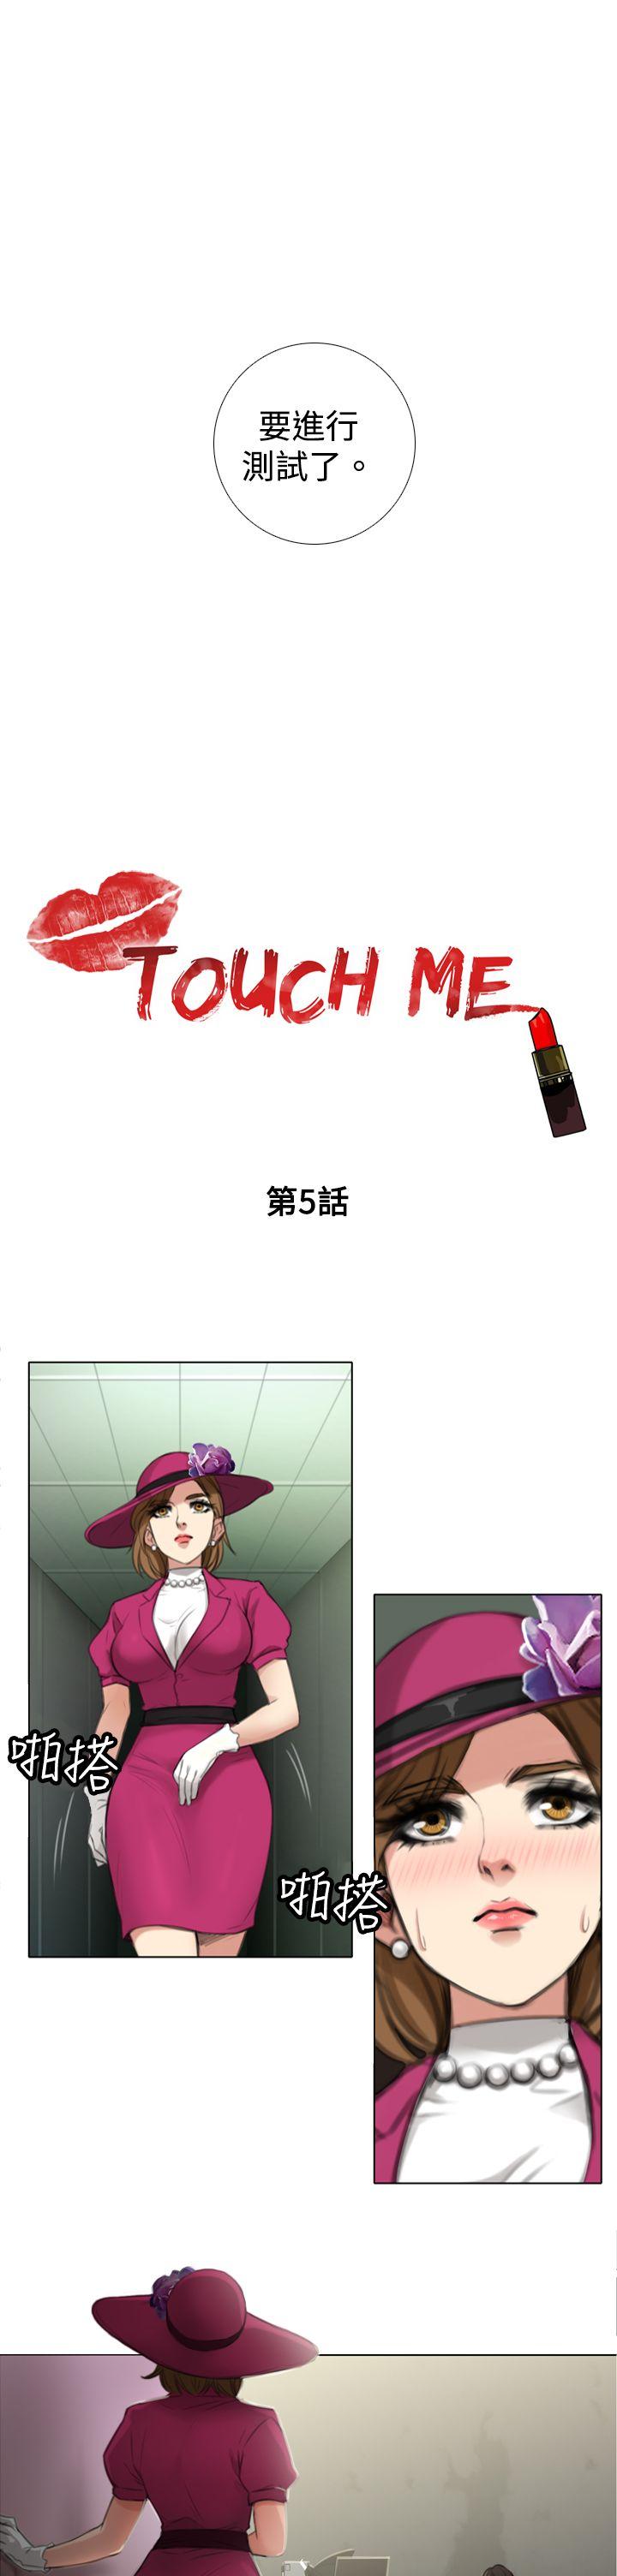 TOUCH ME[h漫]-TOUCH ME-第5話全彩韩漫标签